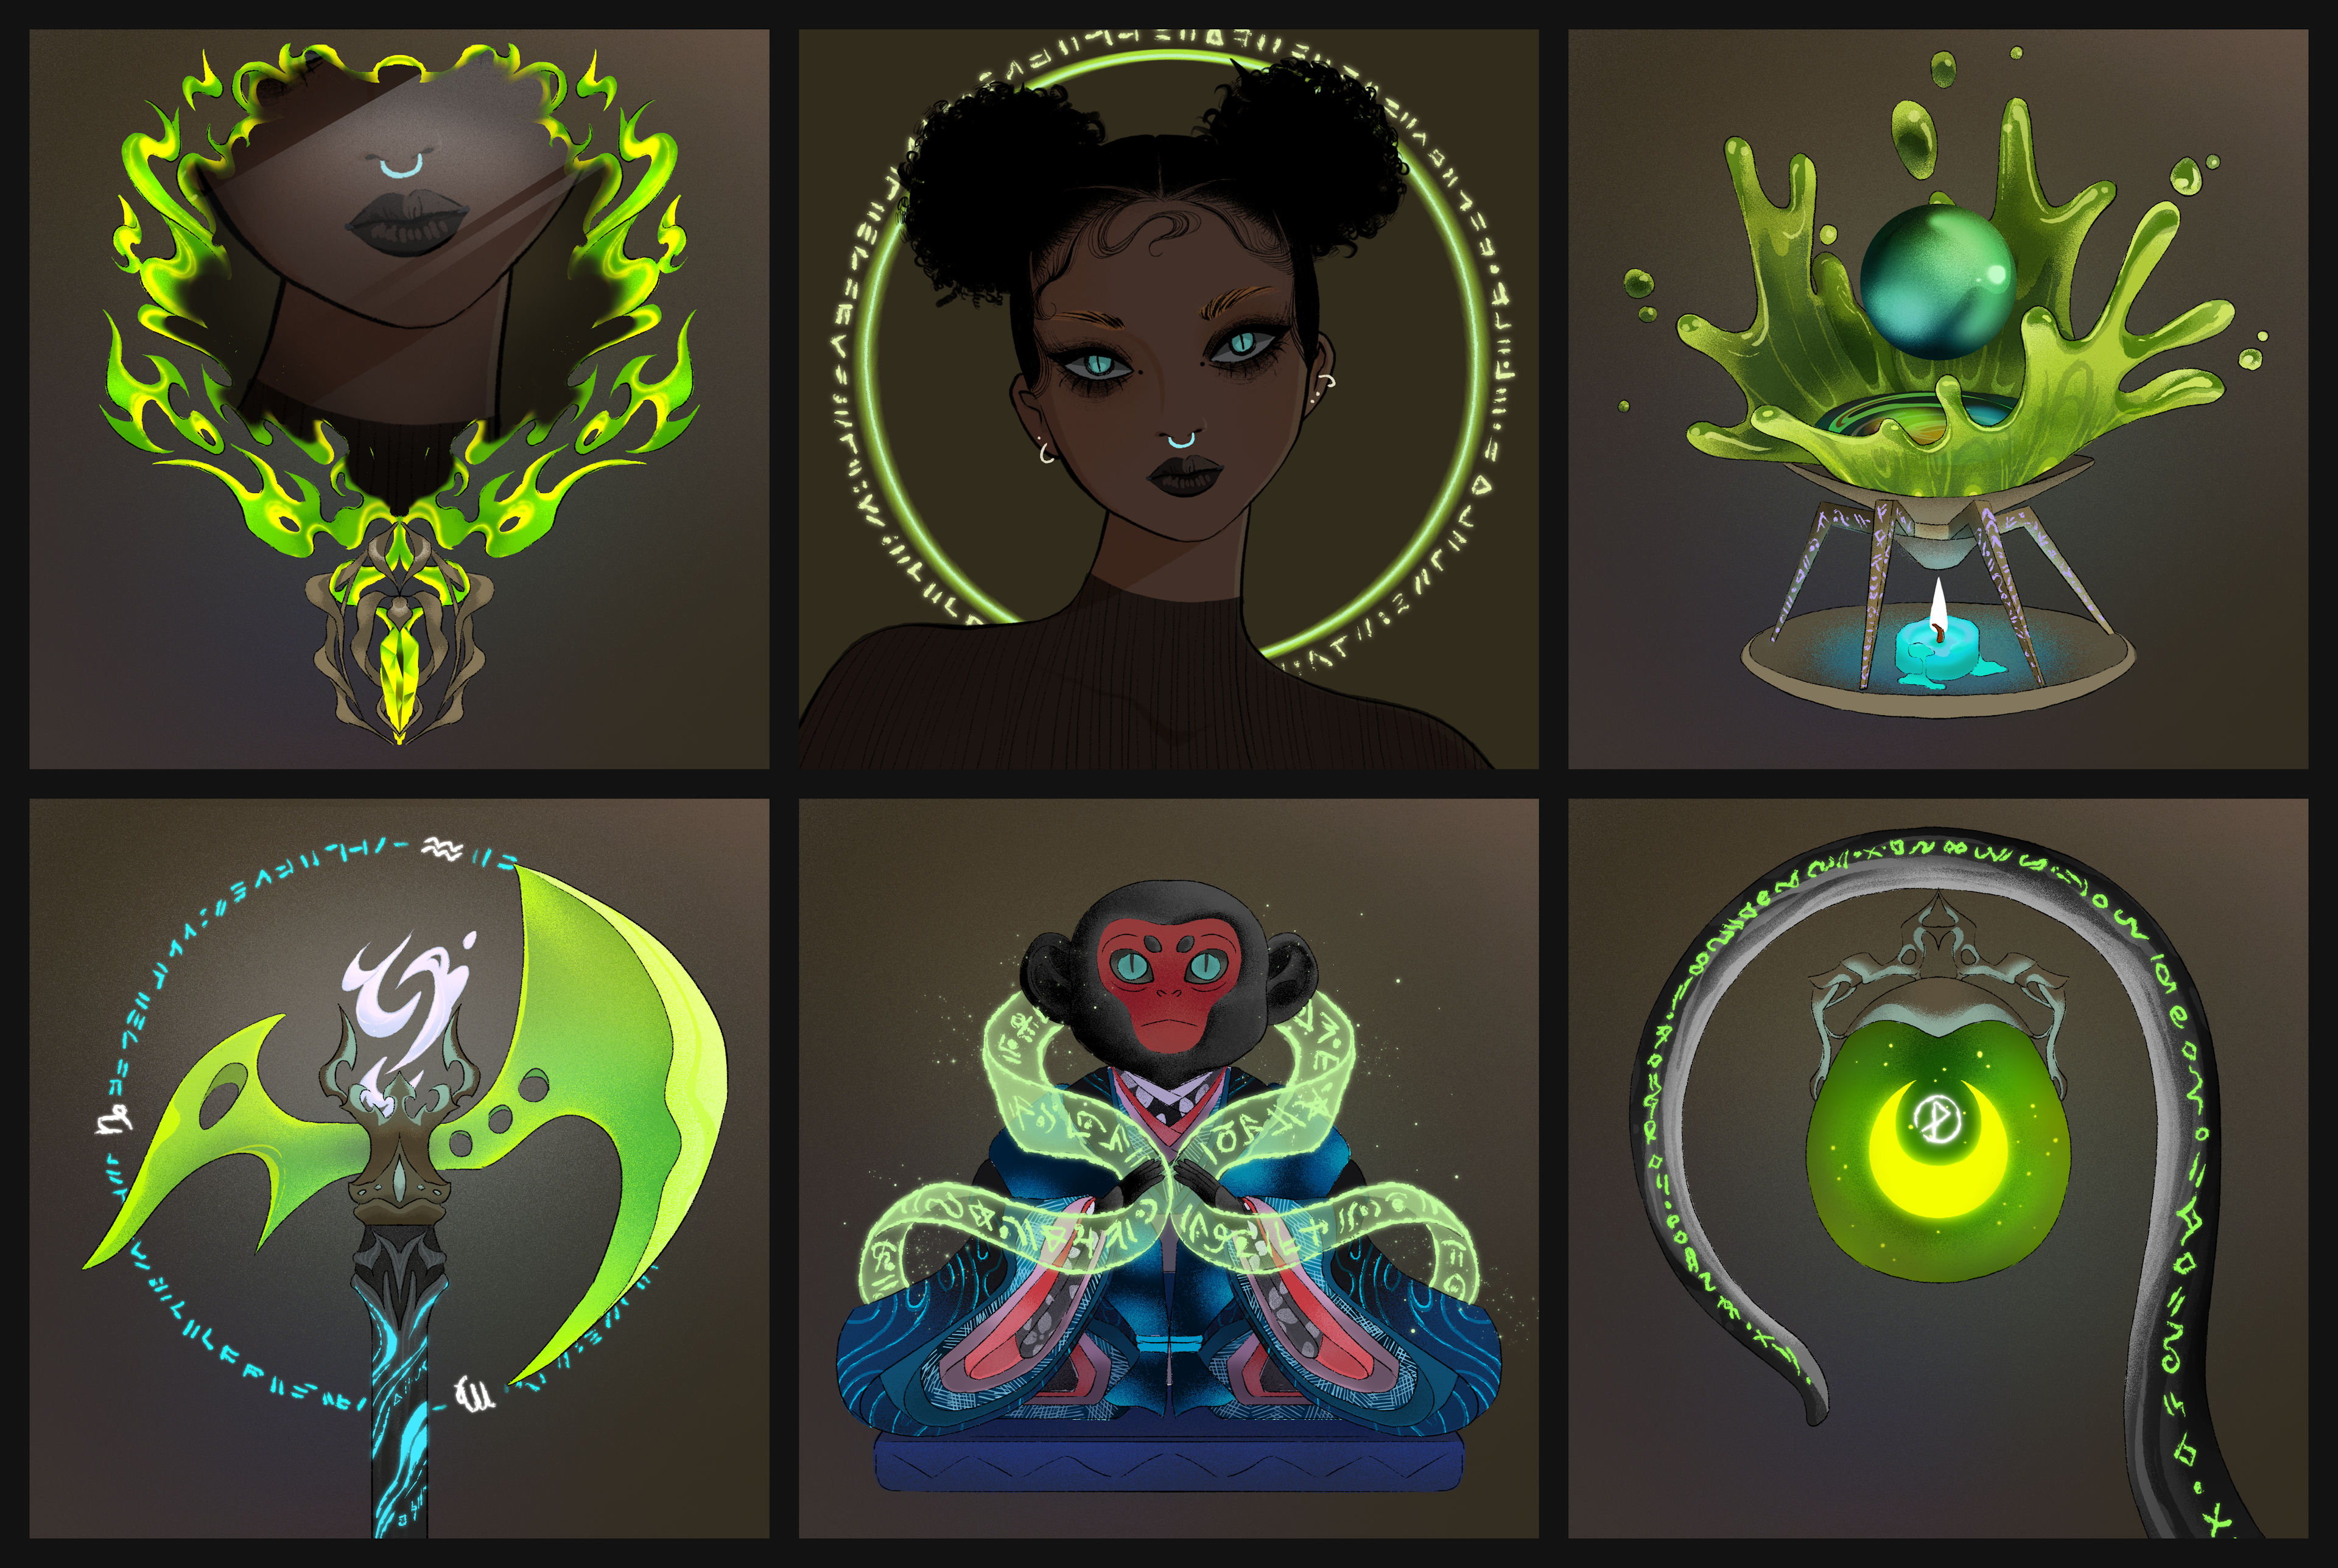 A full set of ARTIFACTS fit for a MAGE, with the "moss" background and the "glo" primary colorway, for the WITCH Equuleus, the Keen Quadrant.